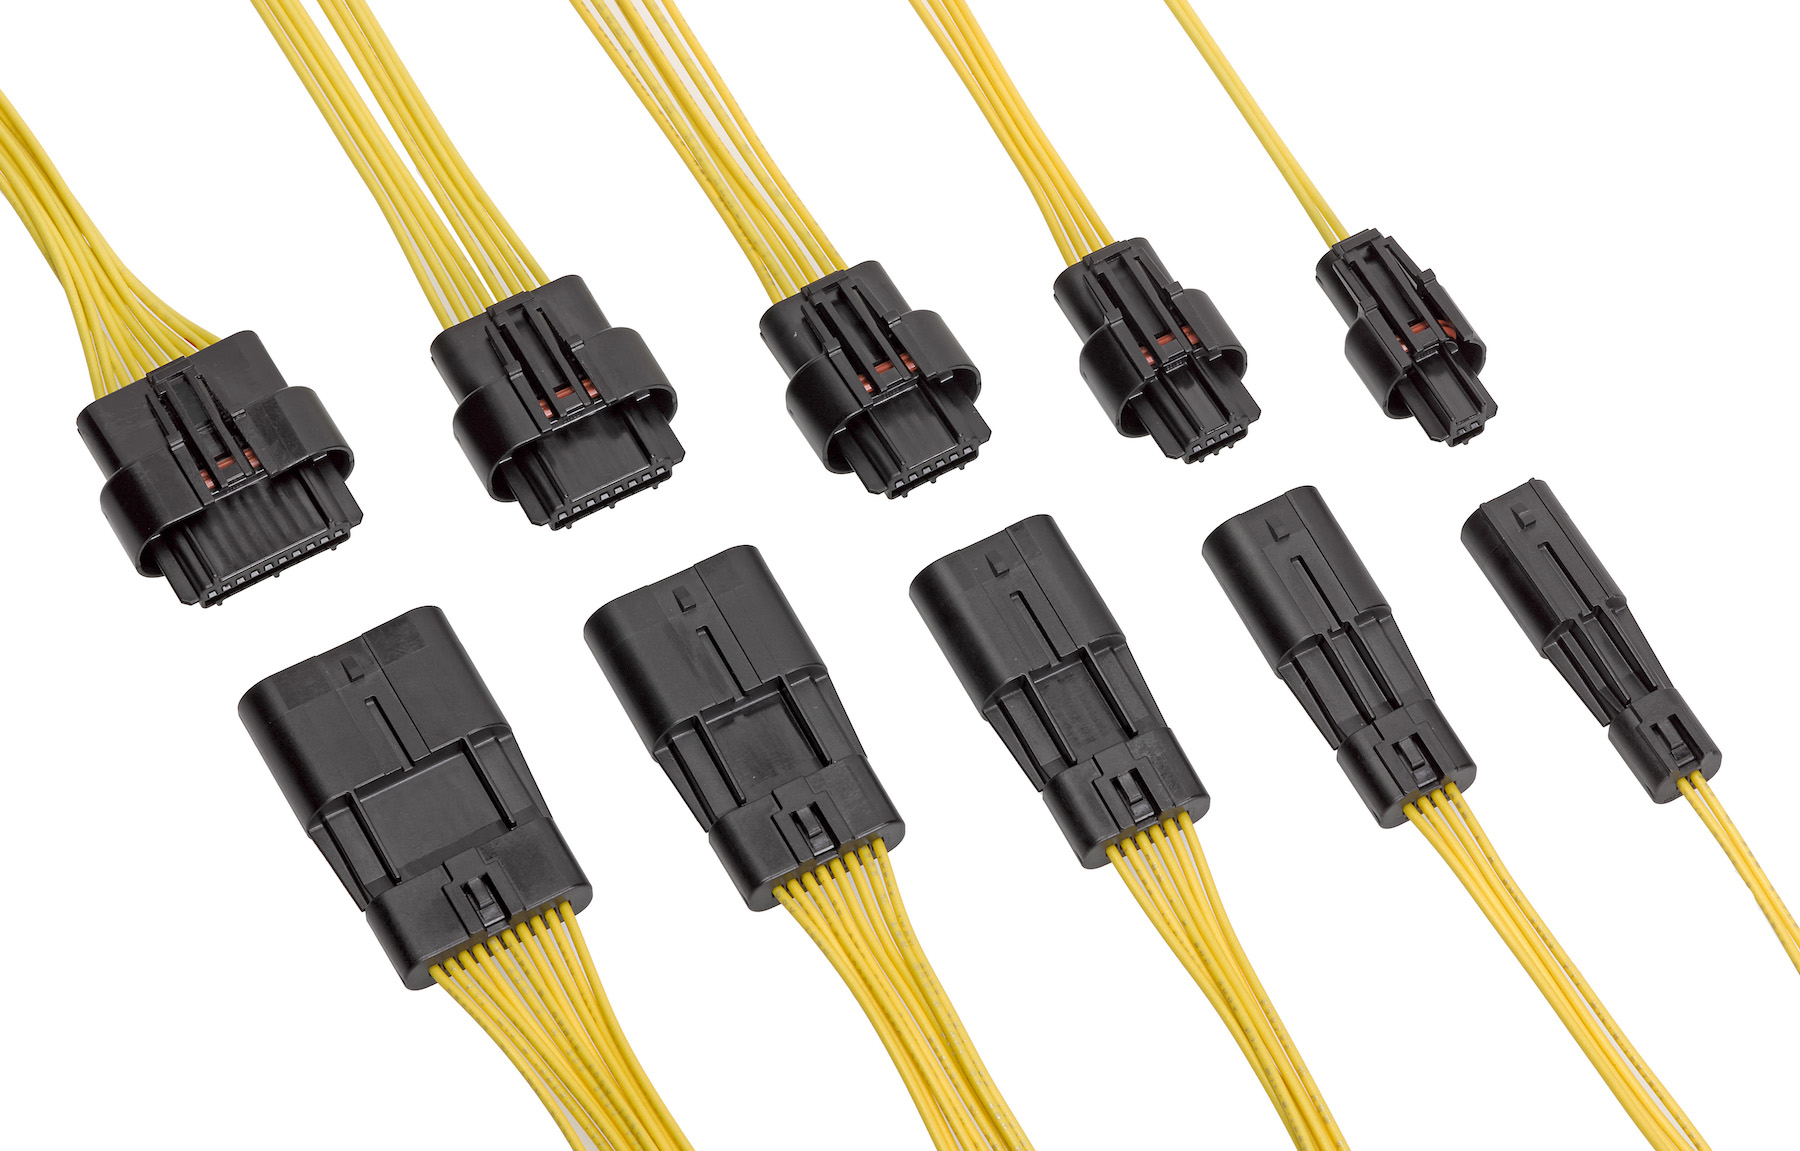 Sealed Wire-to-Wire Automotive Connectors from Molex